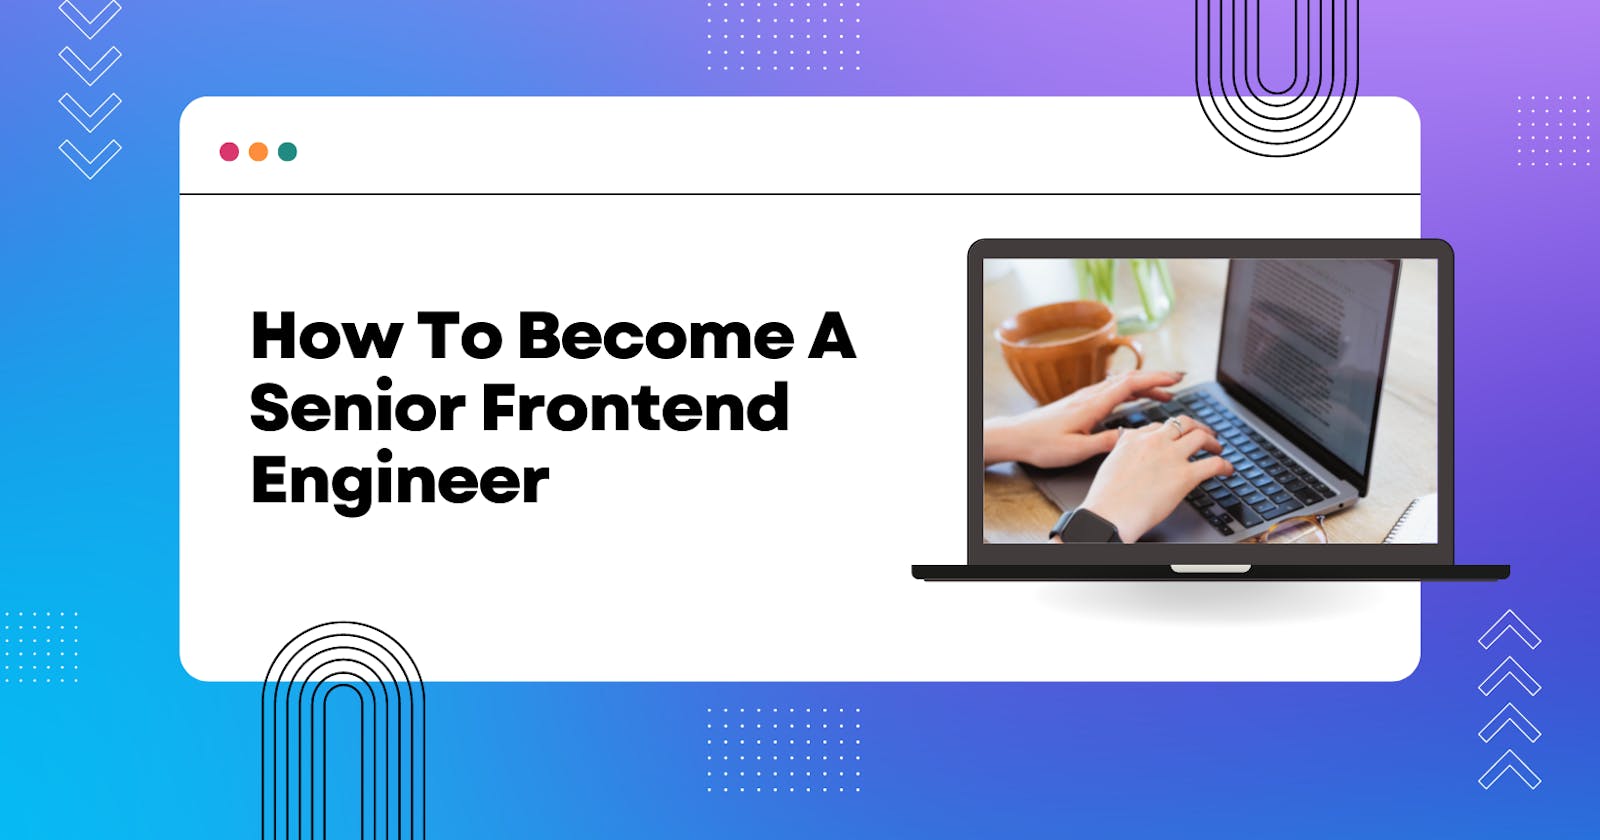 How To Become A Senior Frontend Engineer